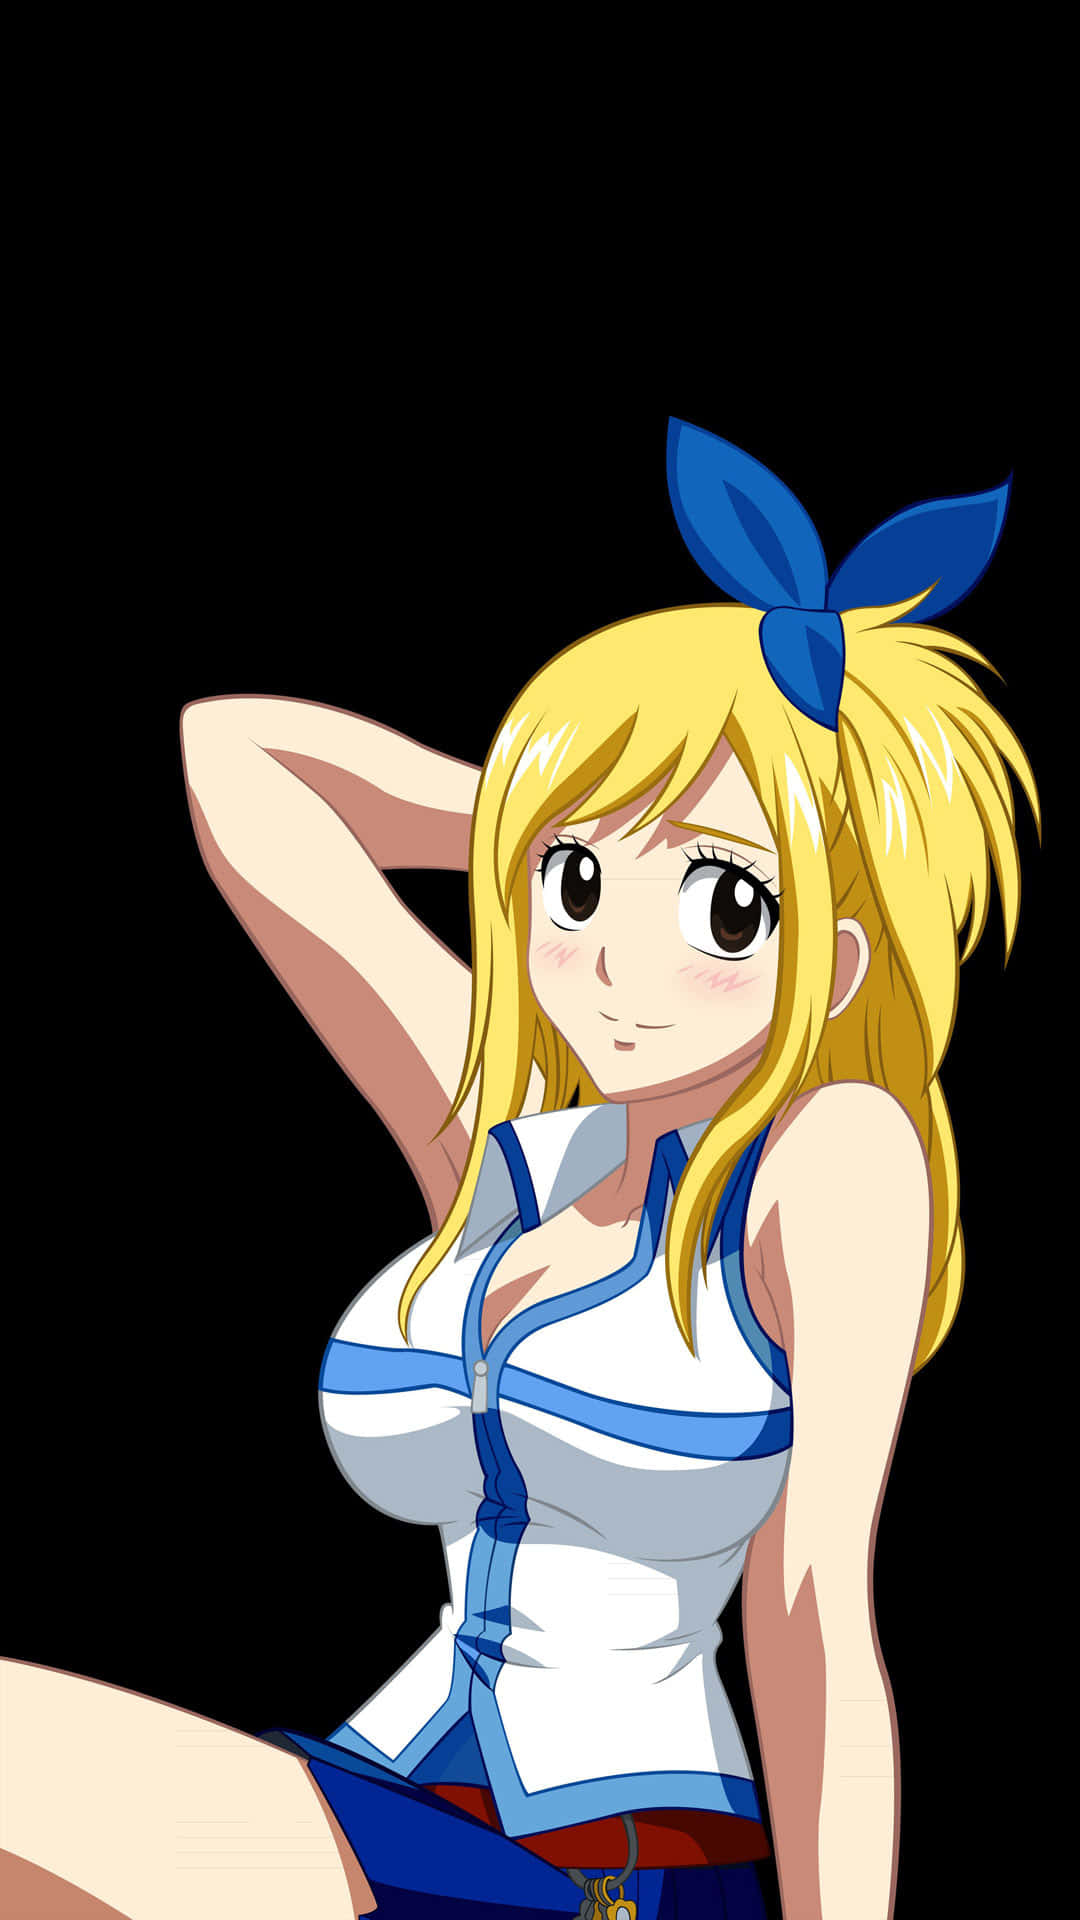 Fairy Tail Iphone Lucy Heartfilia Shy Smile Tapet: Fairy Tail Iphone Lucy Heartfilia Shy Smile Tapet Wallpaper